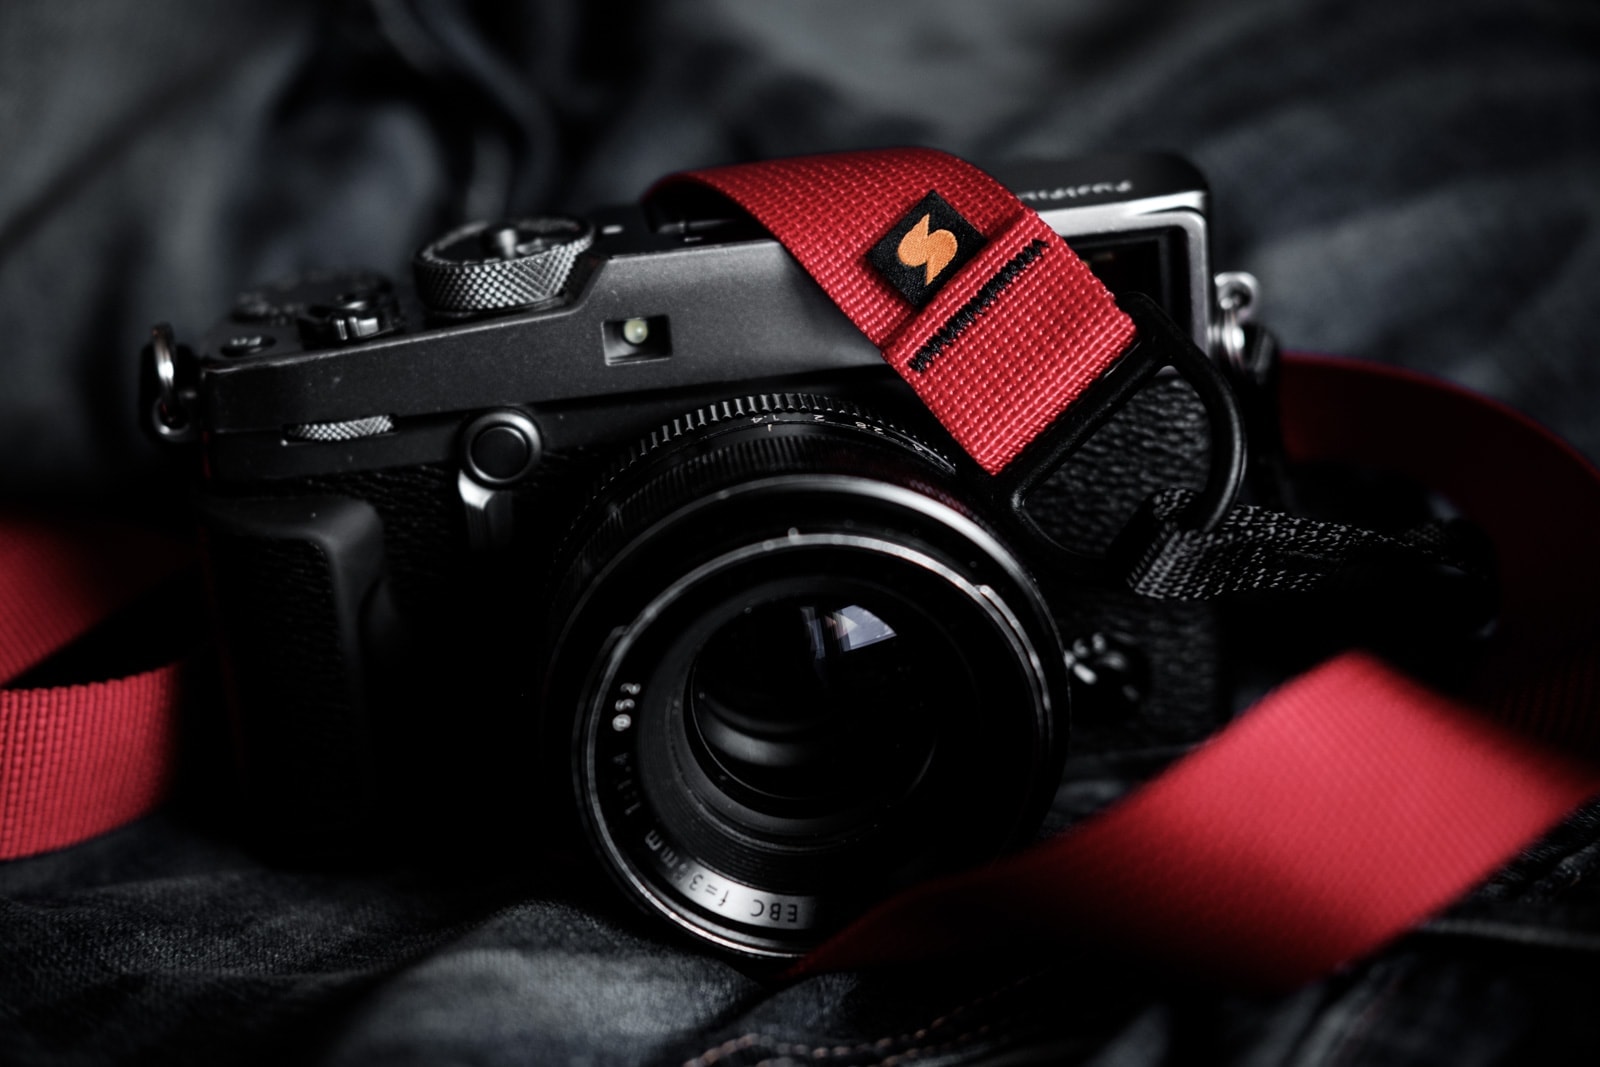 Charlene Winfred reviews her Simplr F1 Camera Strap, shown here on the Graphite X-Pro2